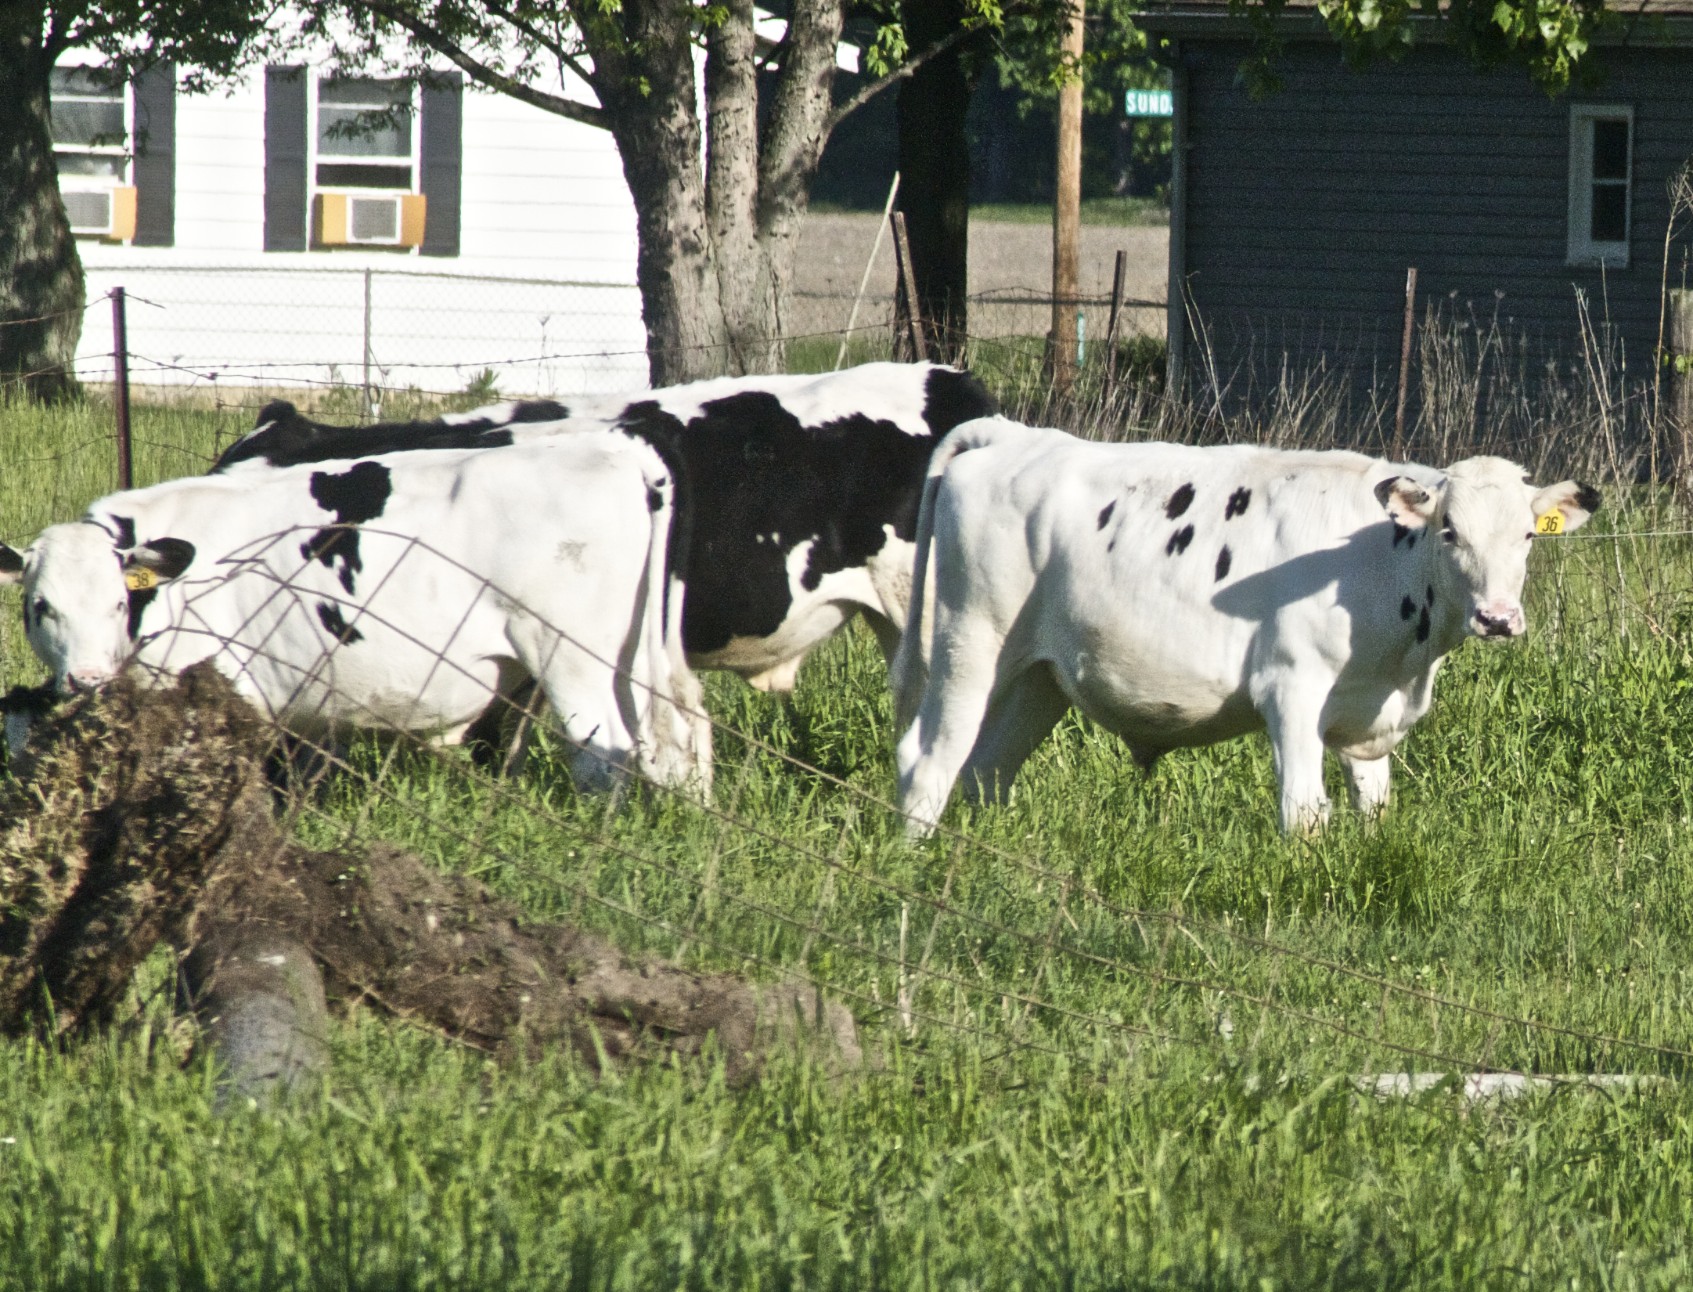 cows standing in a field grazing on grass